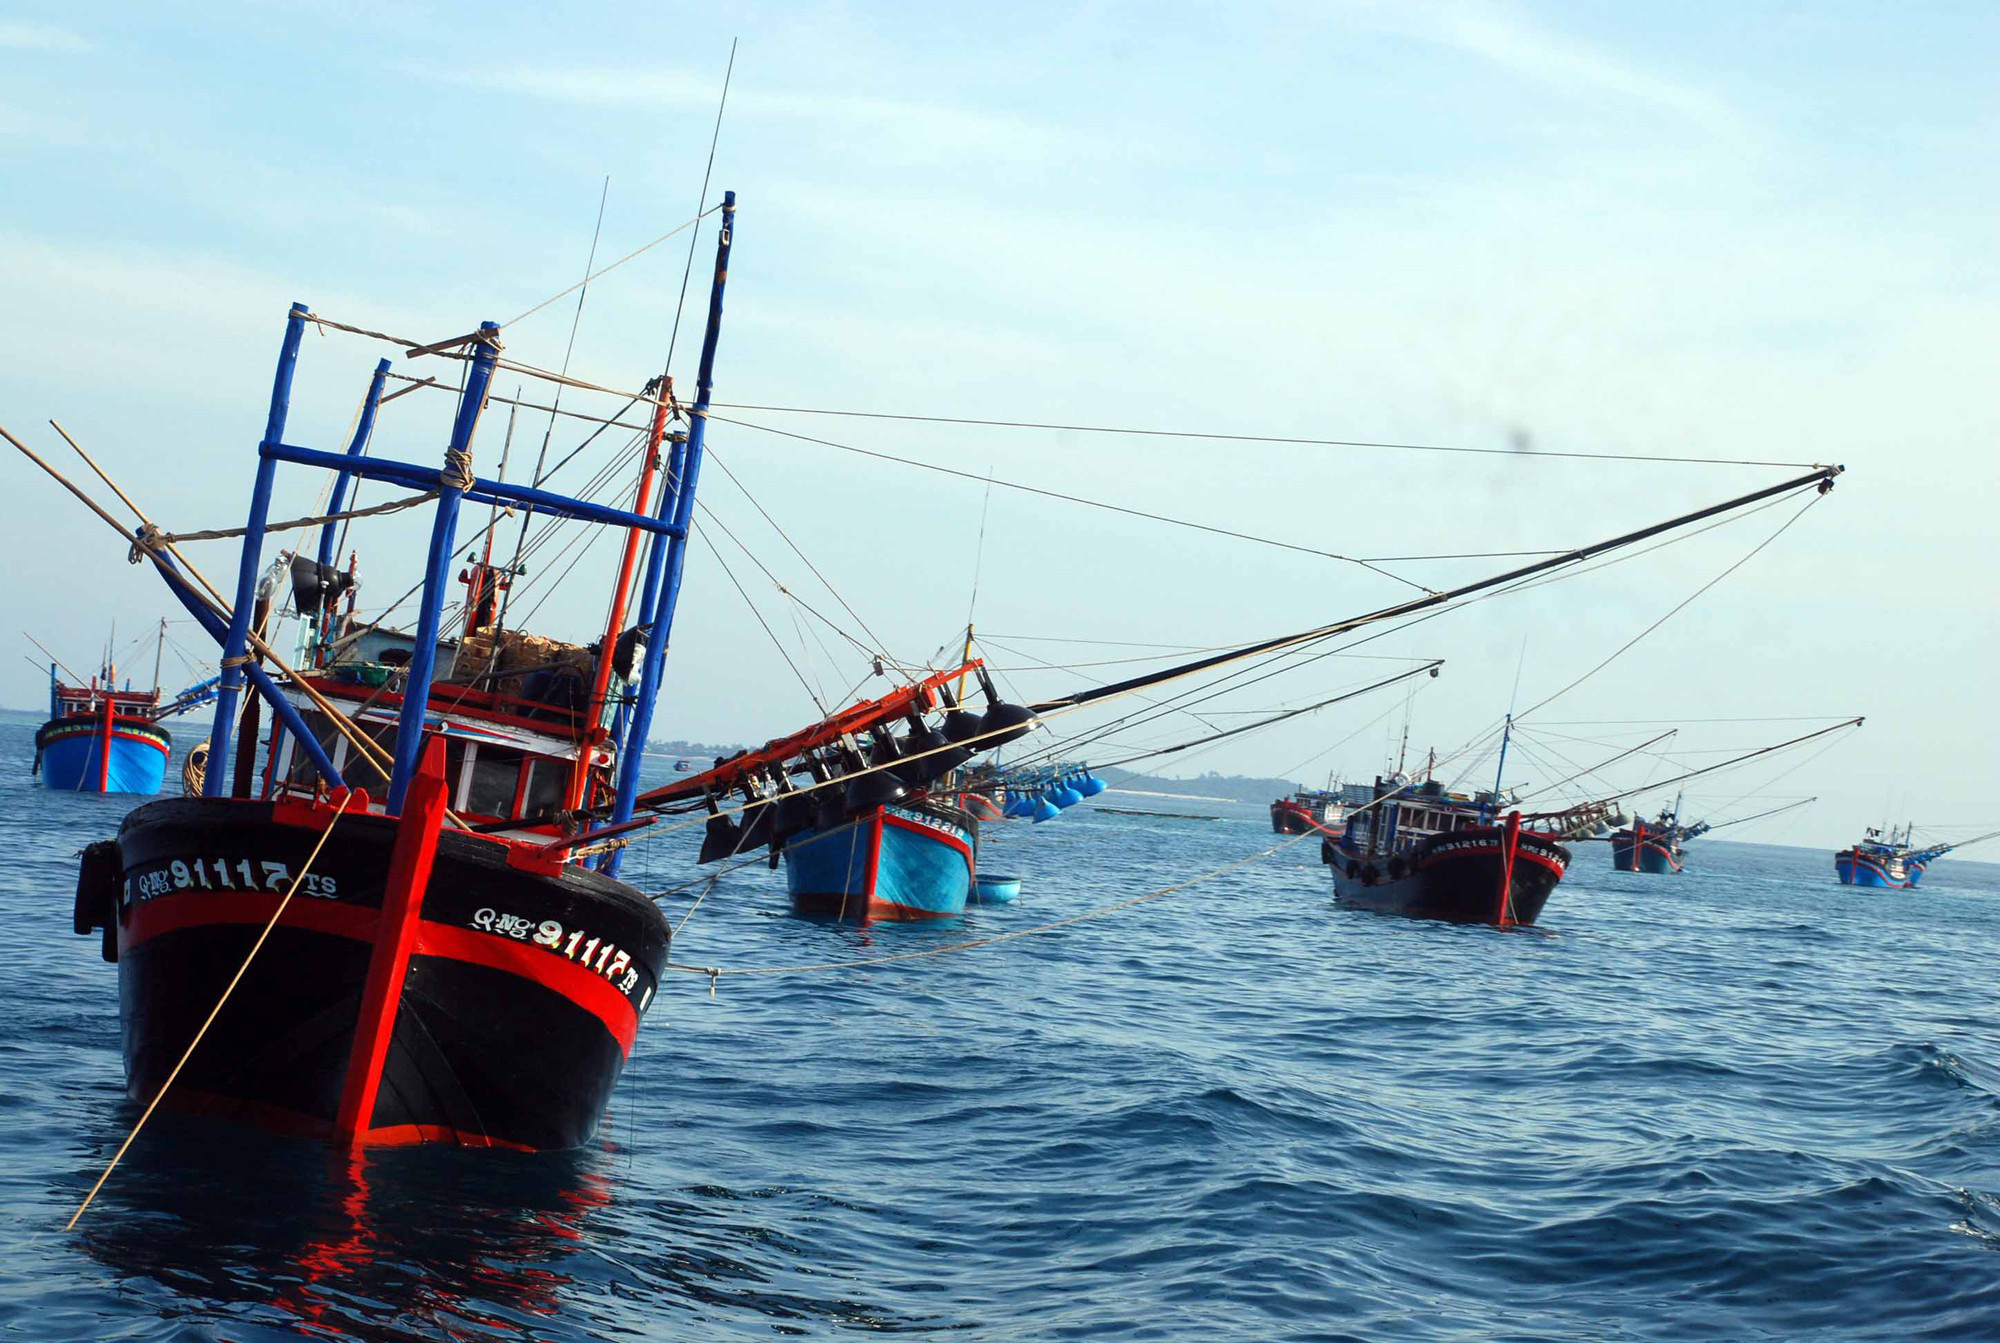 US ‘seriously concerned’ by China’s sinking of Vietnamese fishing boat